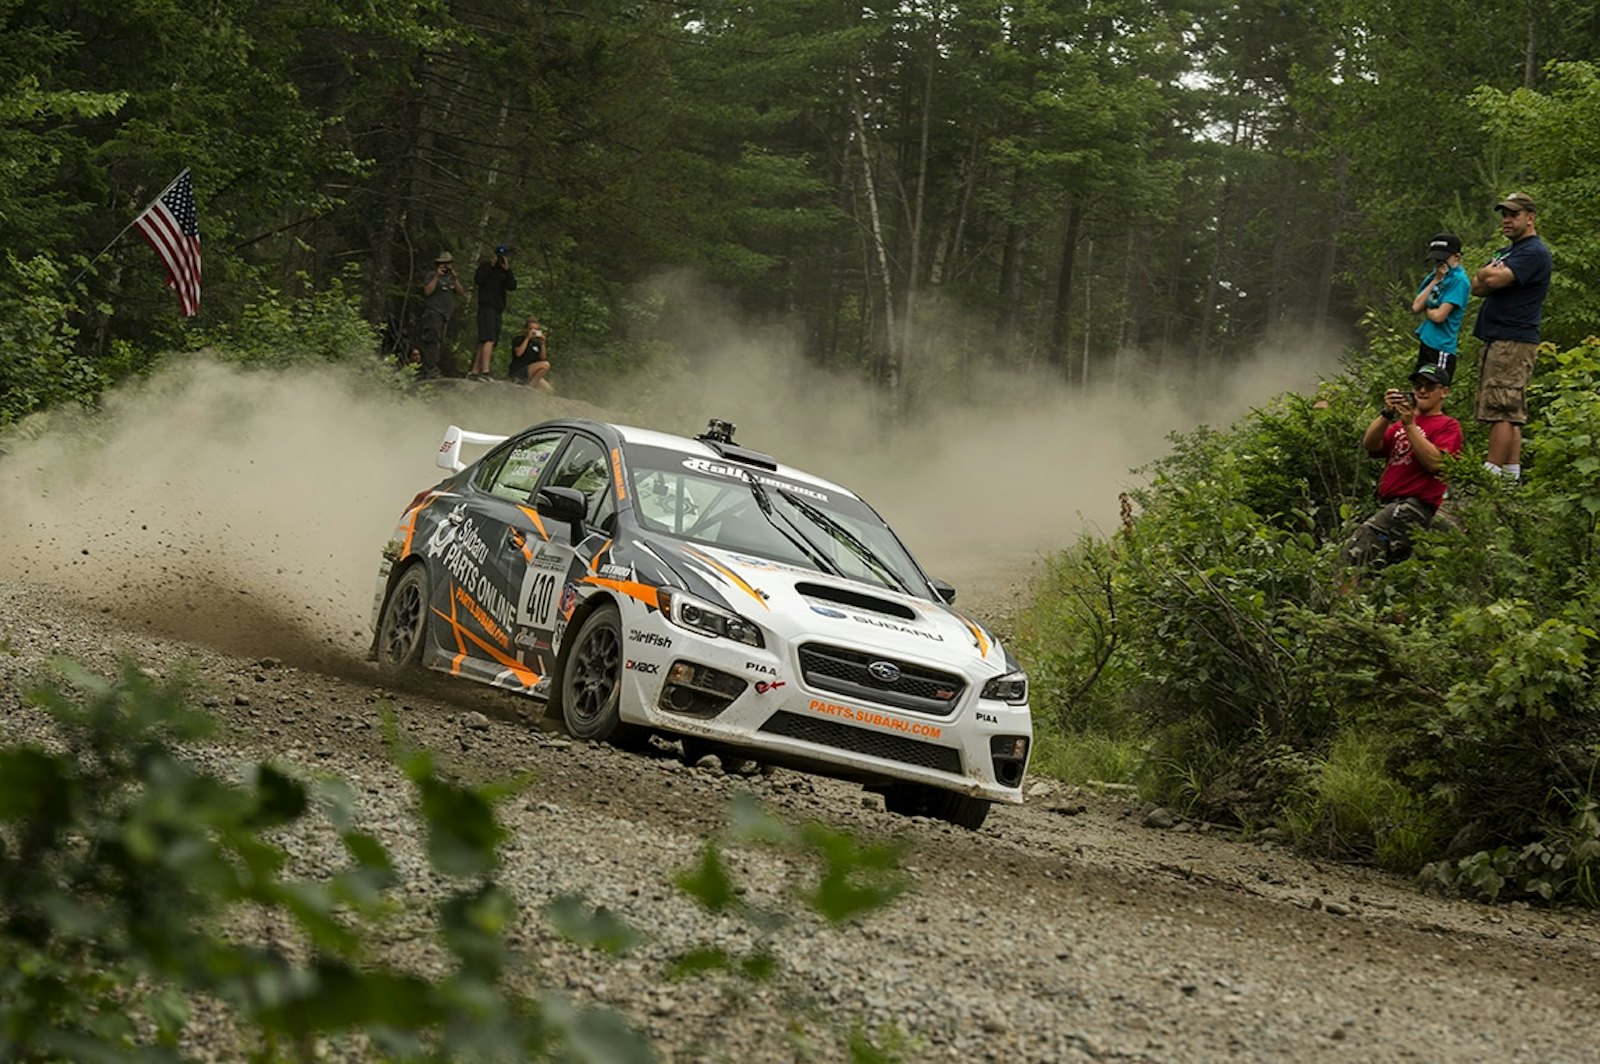 Bucky Lasek put his Subaru Parts Online WRX STI on the podium at New England Forest Rally